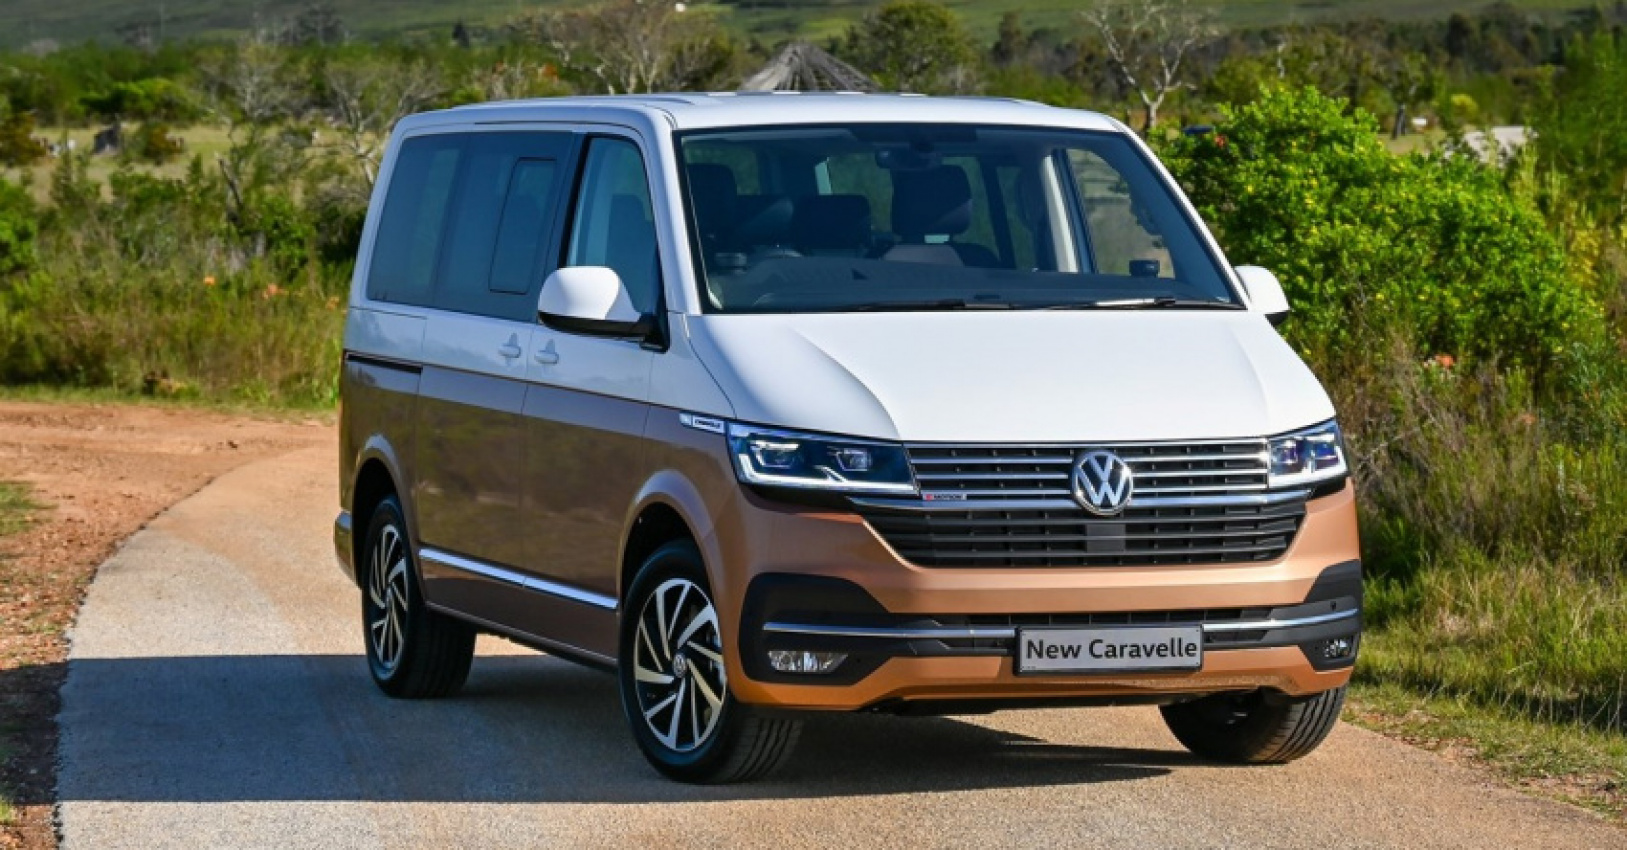 autos, cars, features, vw golf 8 gti, vw polo, the most popular vw cars in south africa